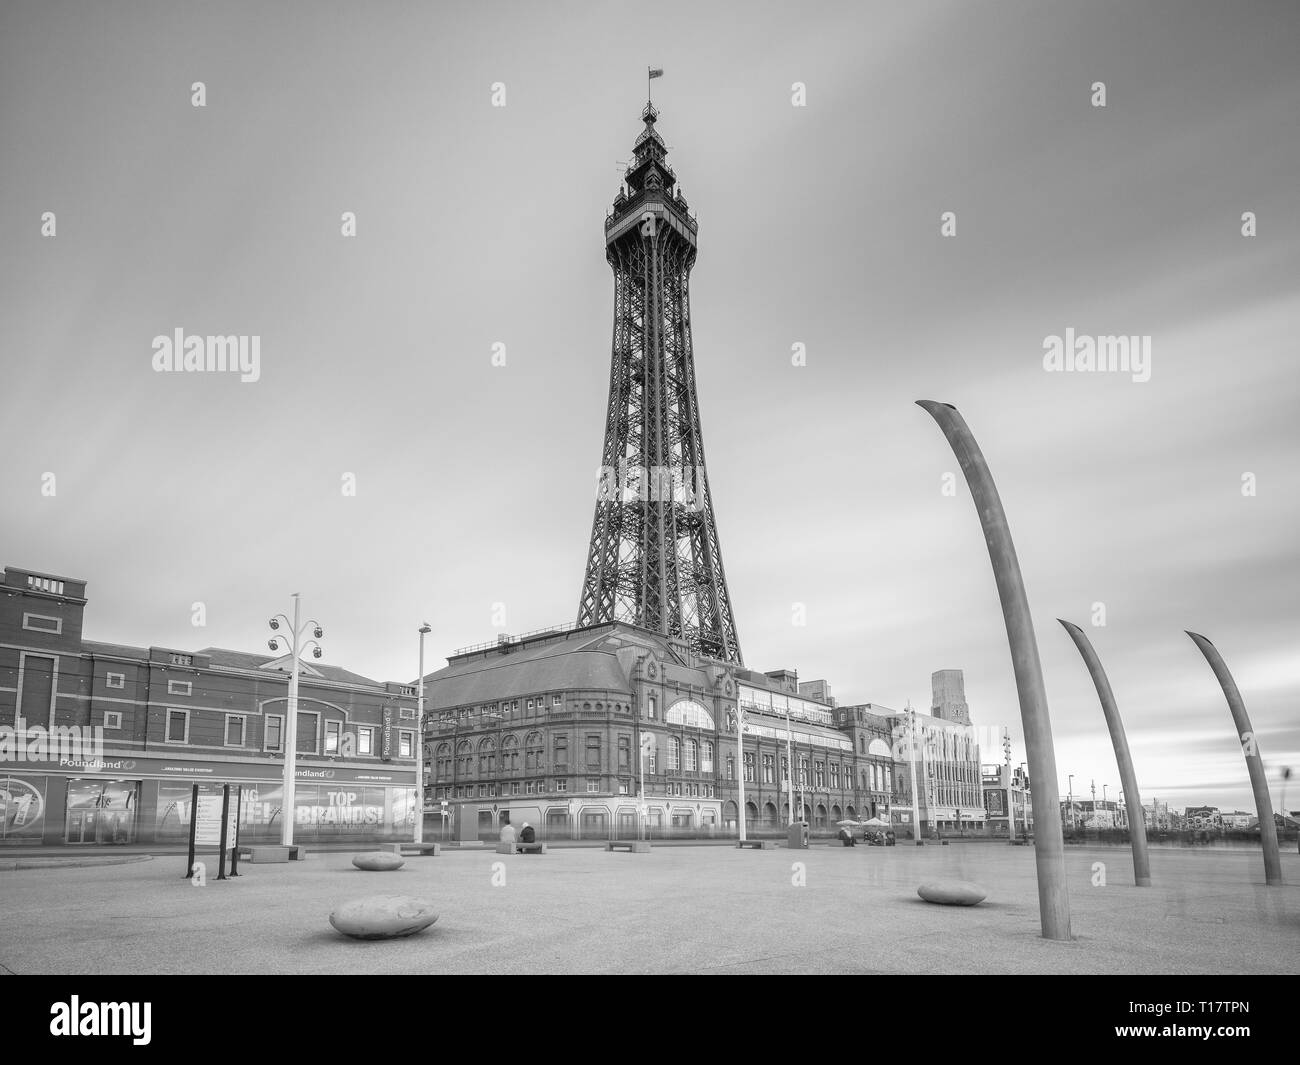 Blackpool Tower was opened to the public on 14 May 1894. Inspired by the Eiffel Tower in Paris, it is 518 feet tall. Blackpool, England Stock Photo